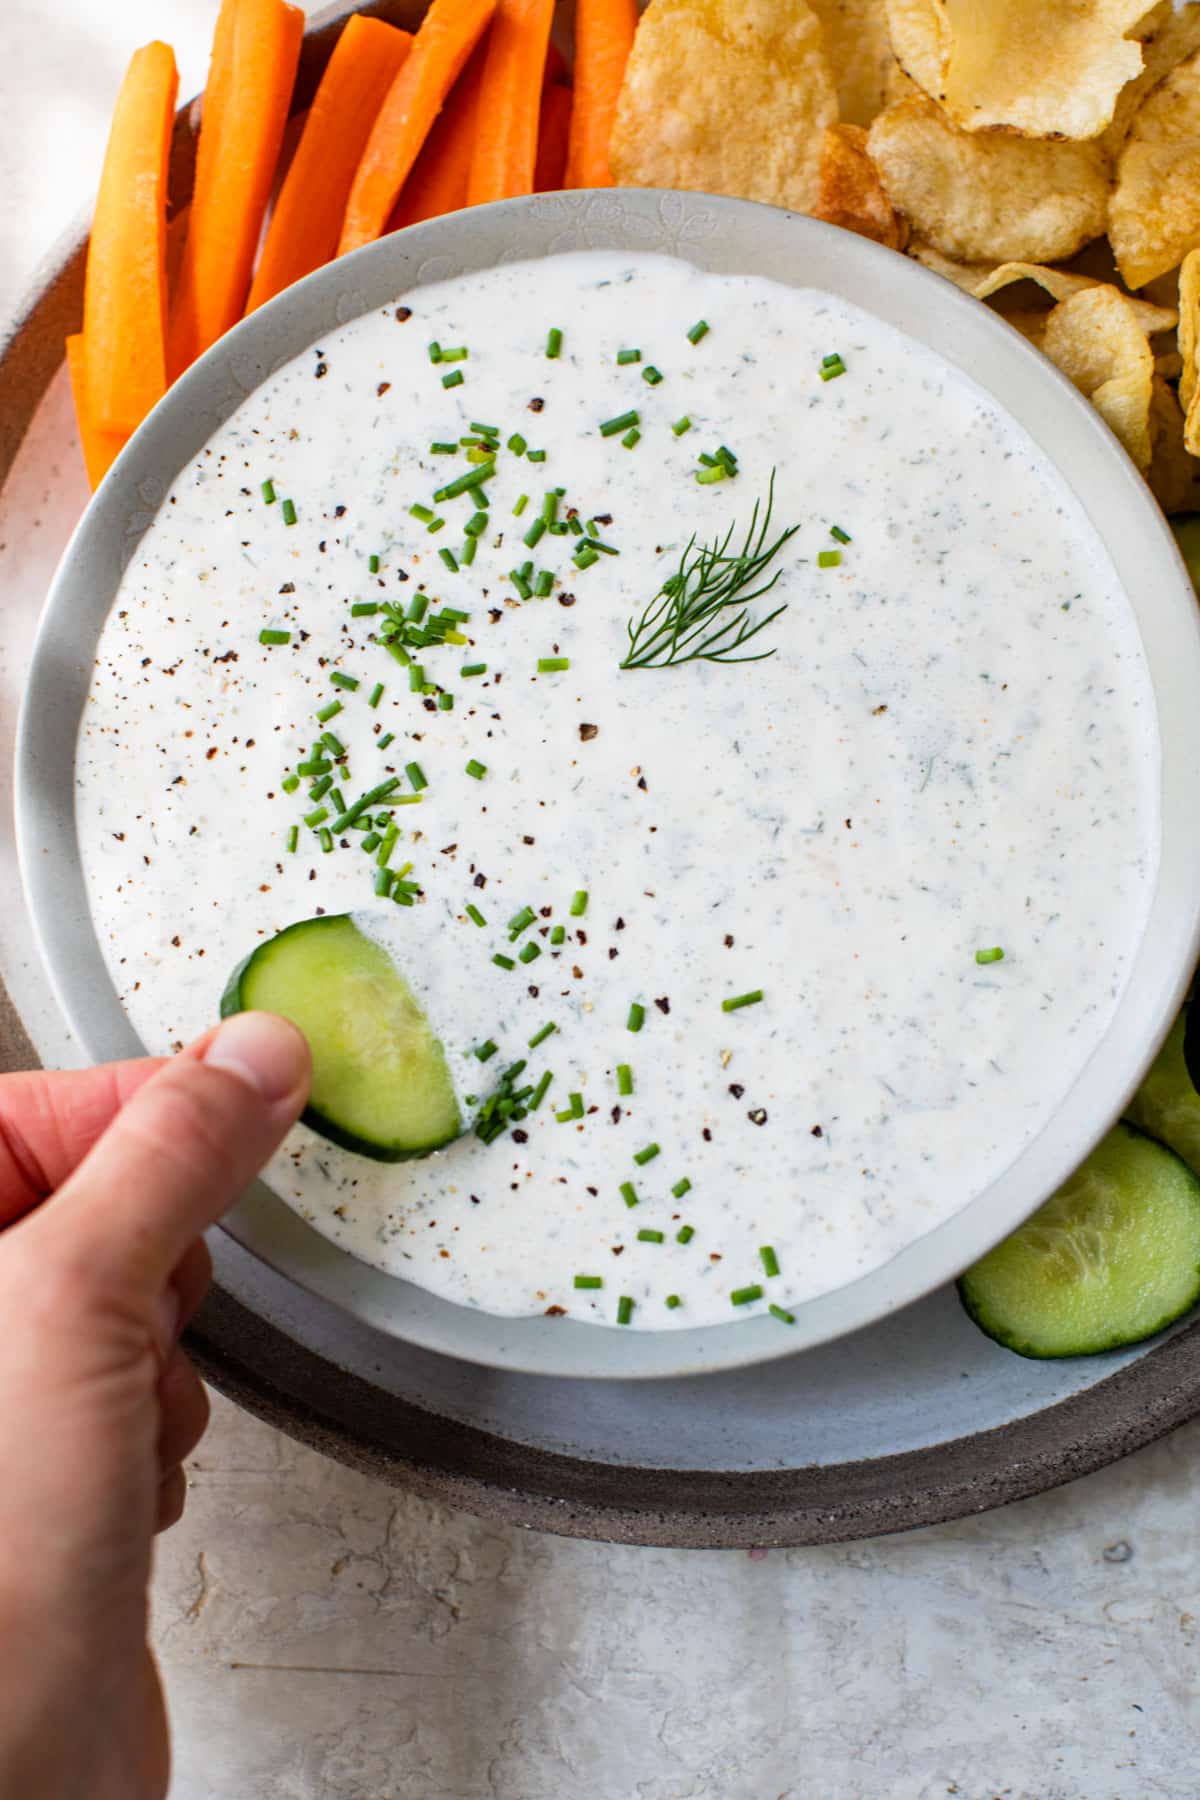 someone's hand dipping a cucumber into a bowl of white-colored dip